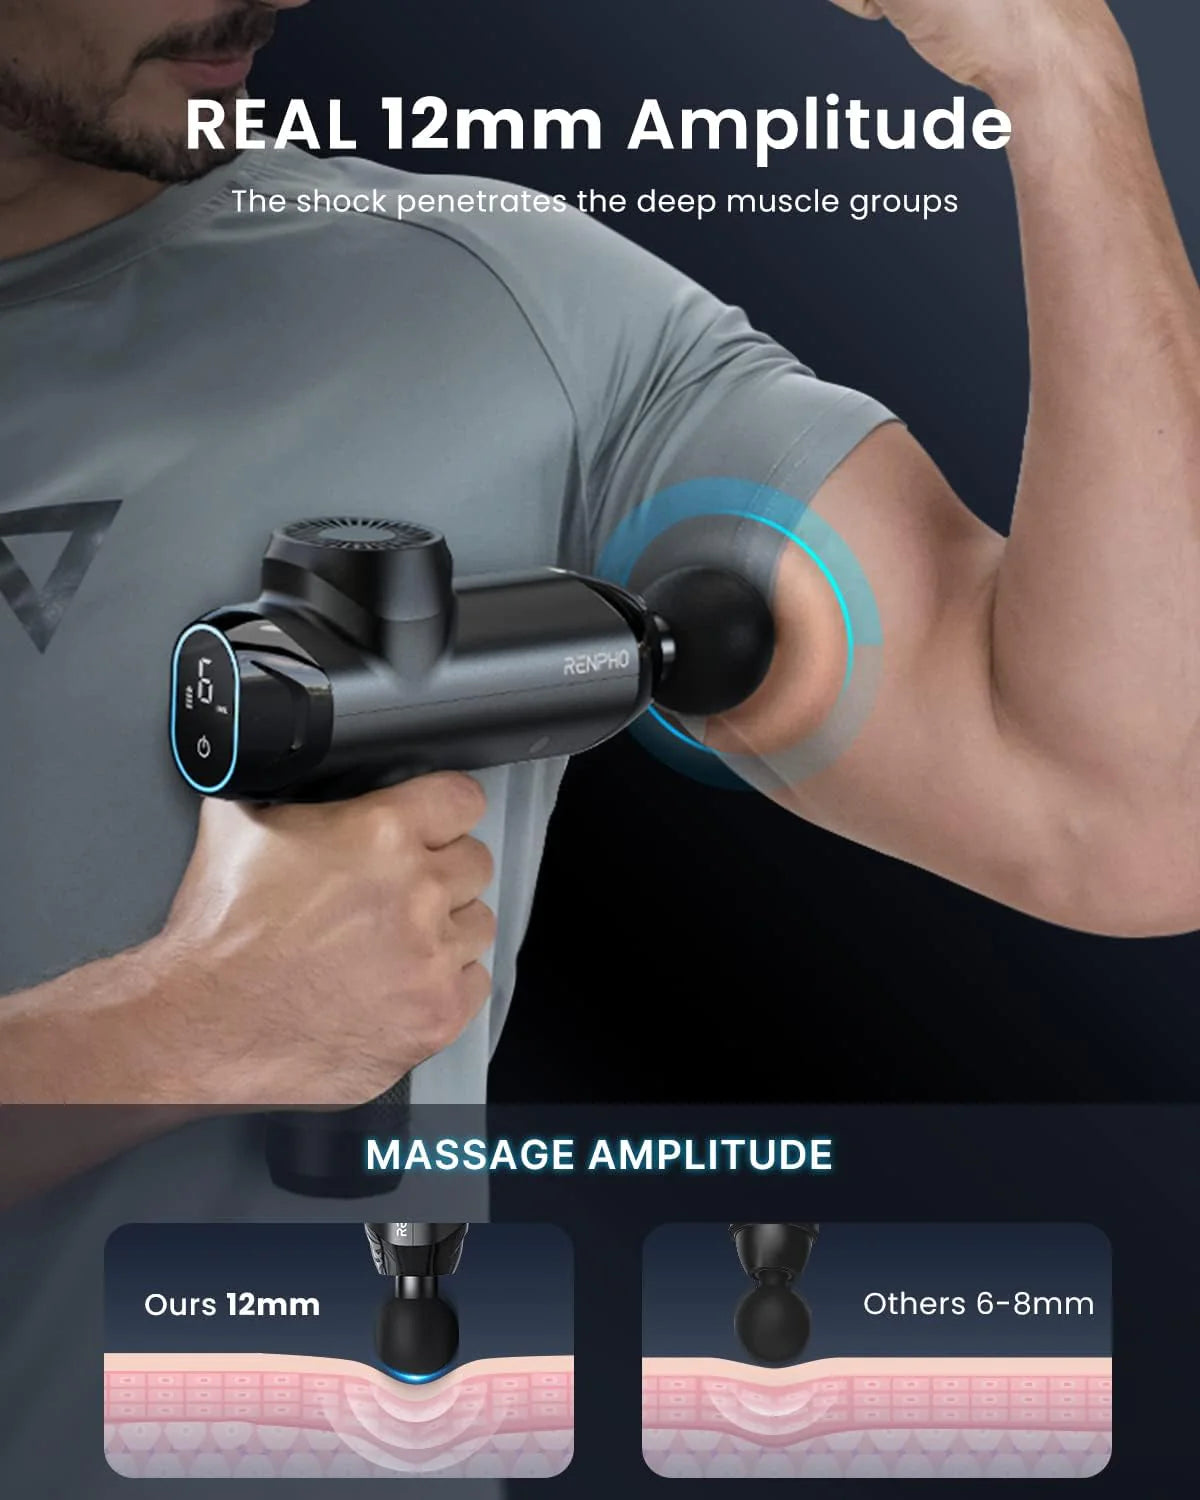 A man using a Power Massage Gun on his bicep to enhance his fitness regimen, highlighting the device’s 12mm amplitude feature compared to others with 6-8mm.